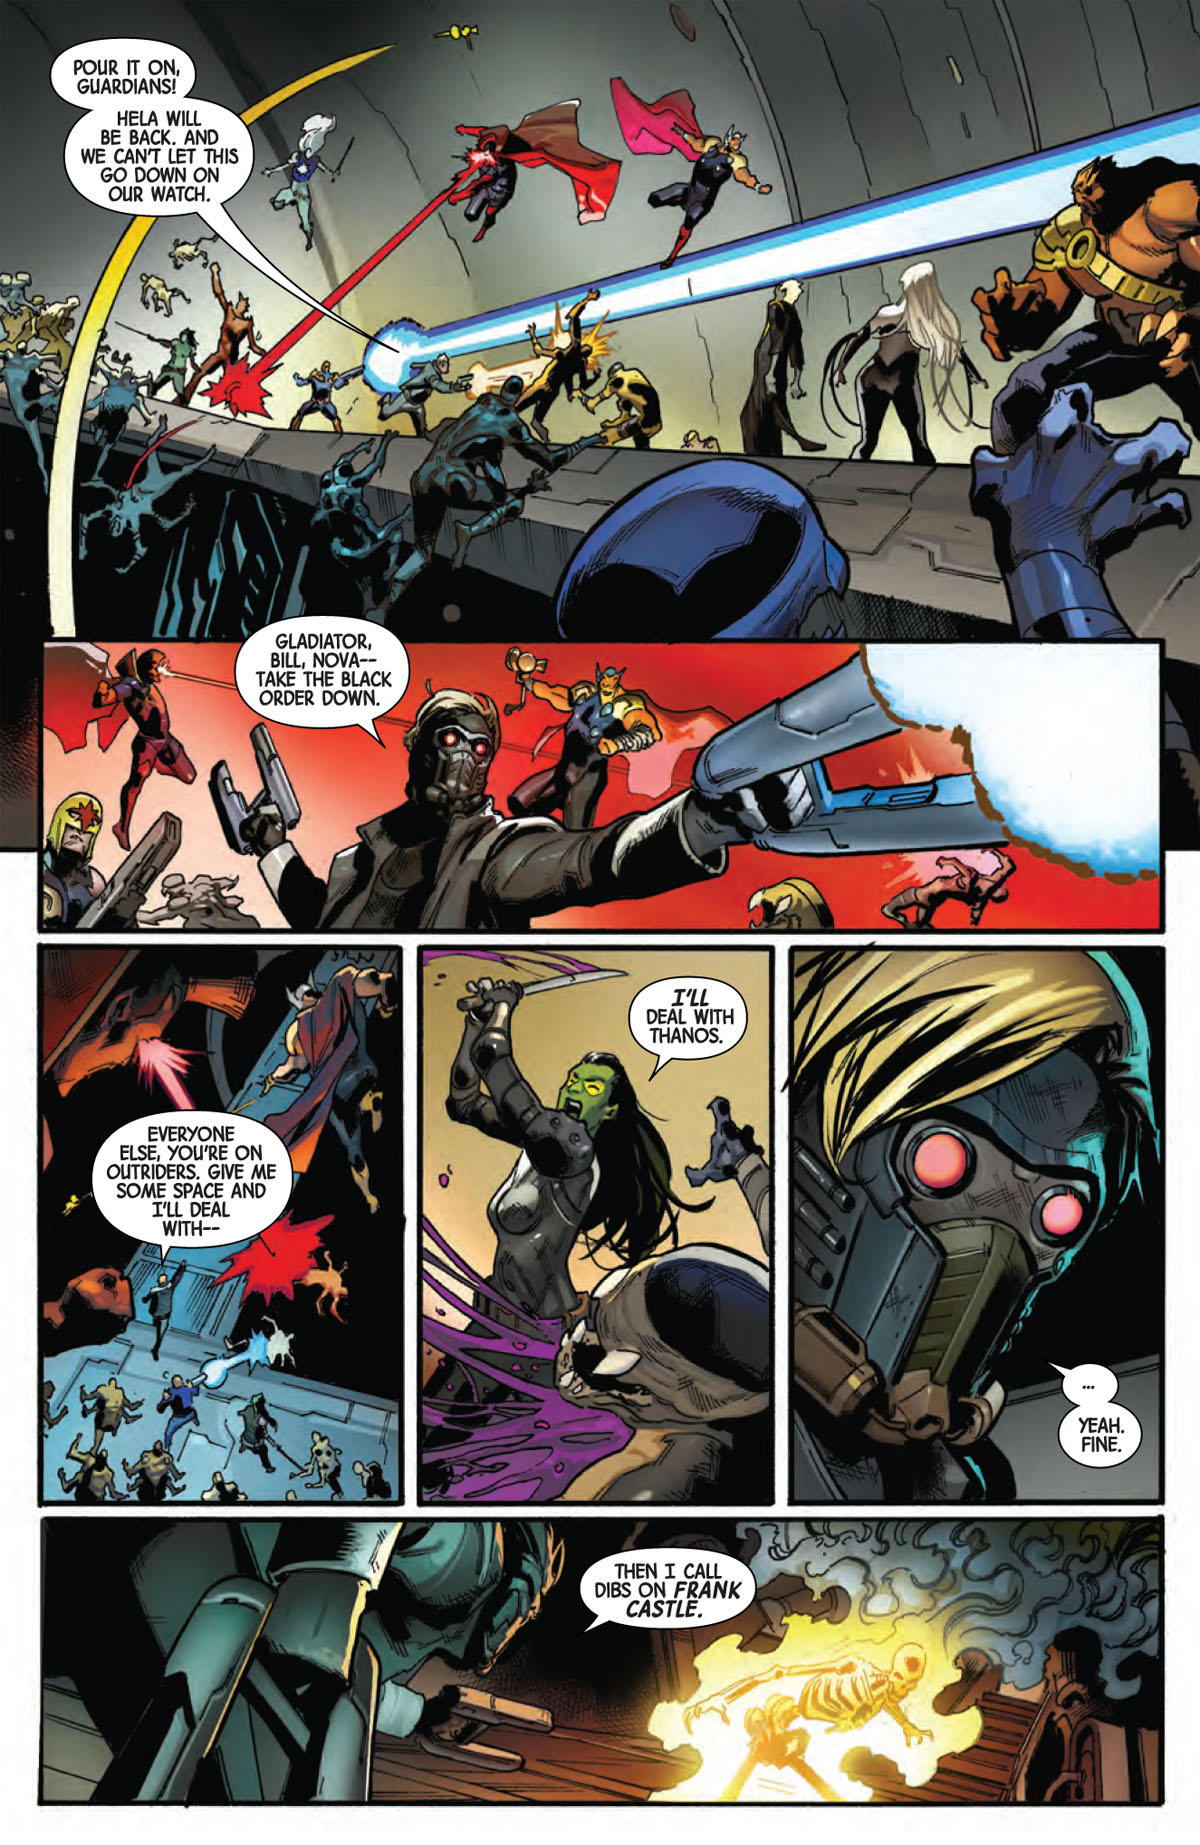 Guardians of the Galaxy #6 page 4